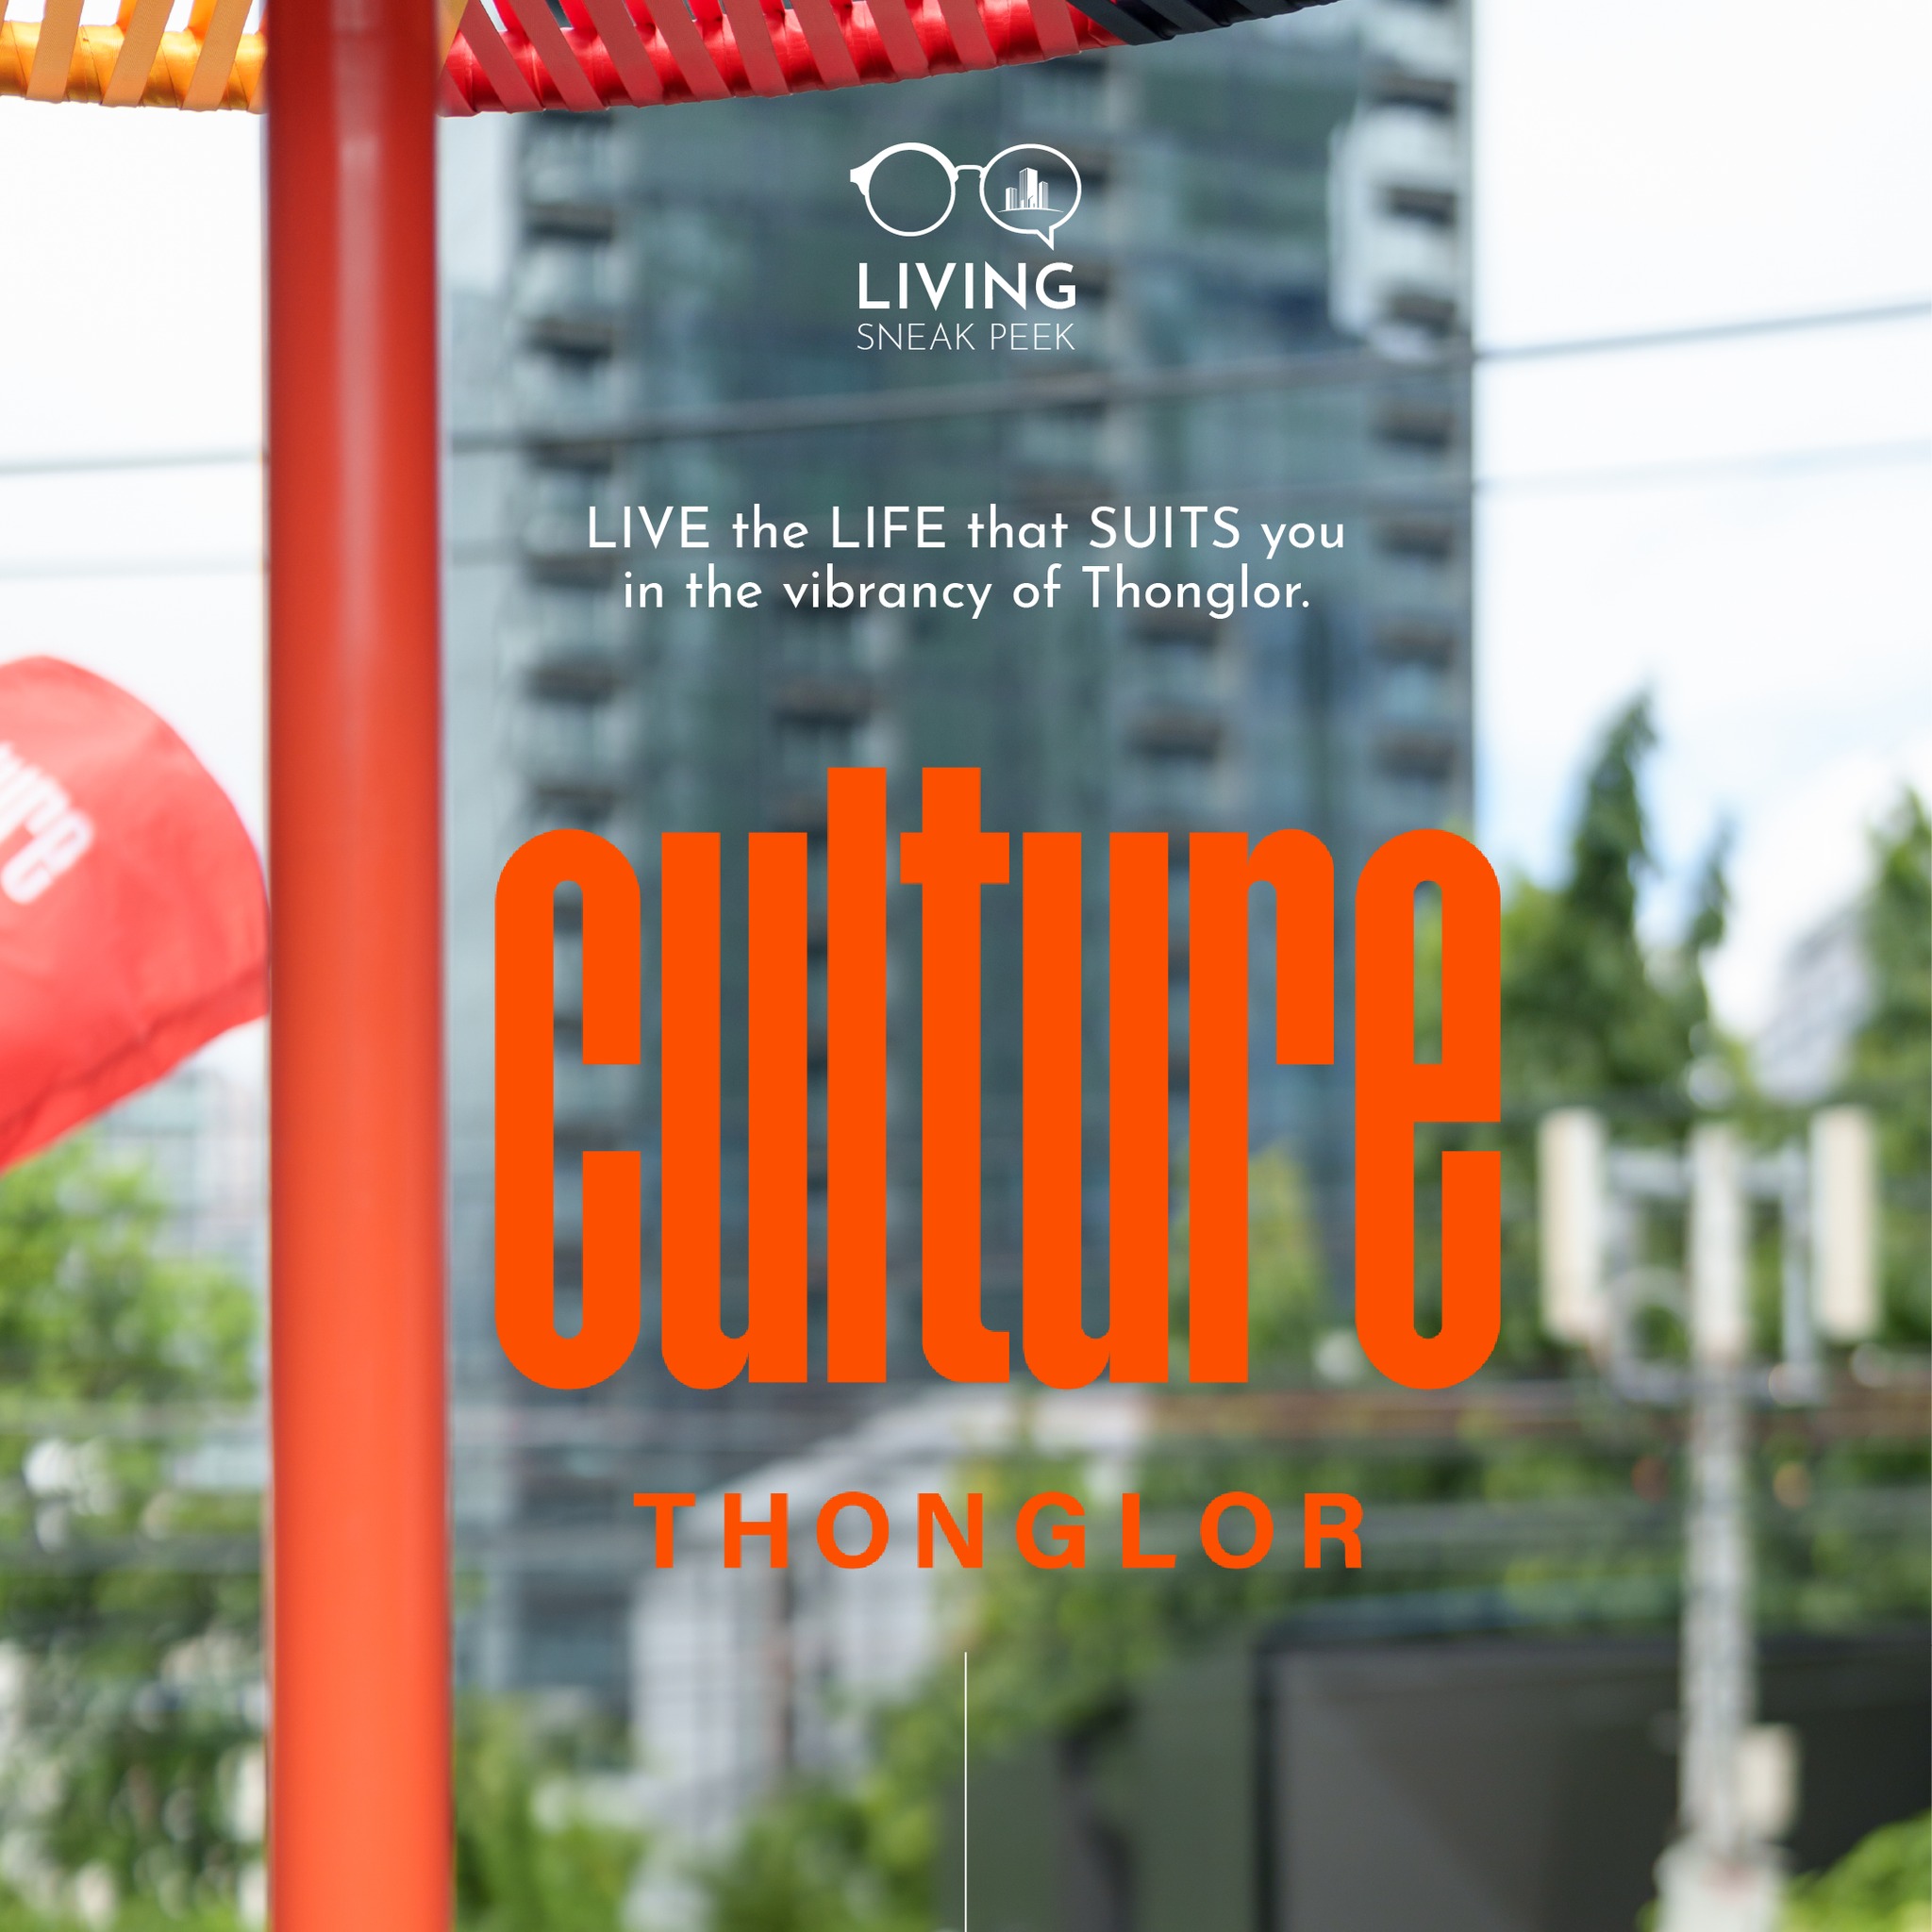 Review Culture Thonglor